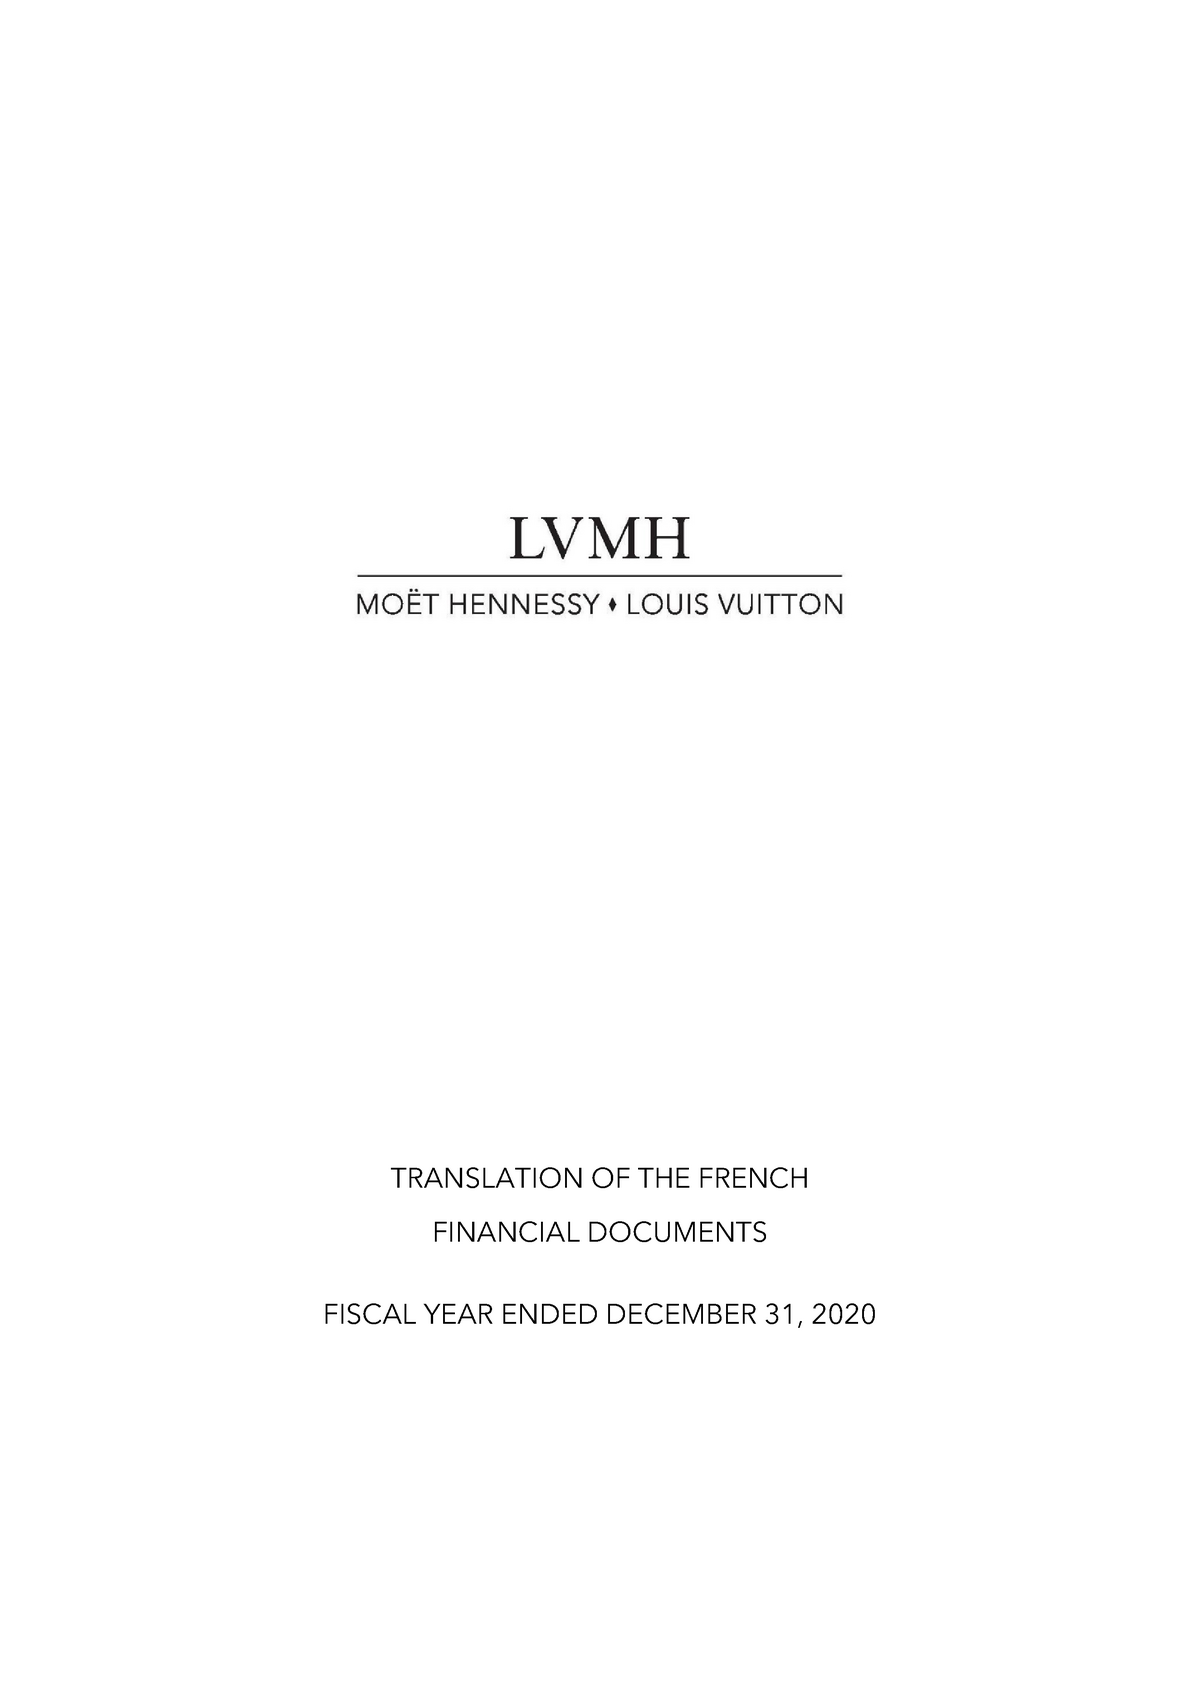 LVMH 2020 annual report - TRANSLATION OF THE FRENCH FINANCIAL DOCUMENTS FISCAL YEAR ENDED StuDocu